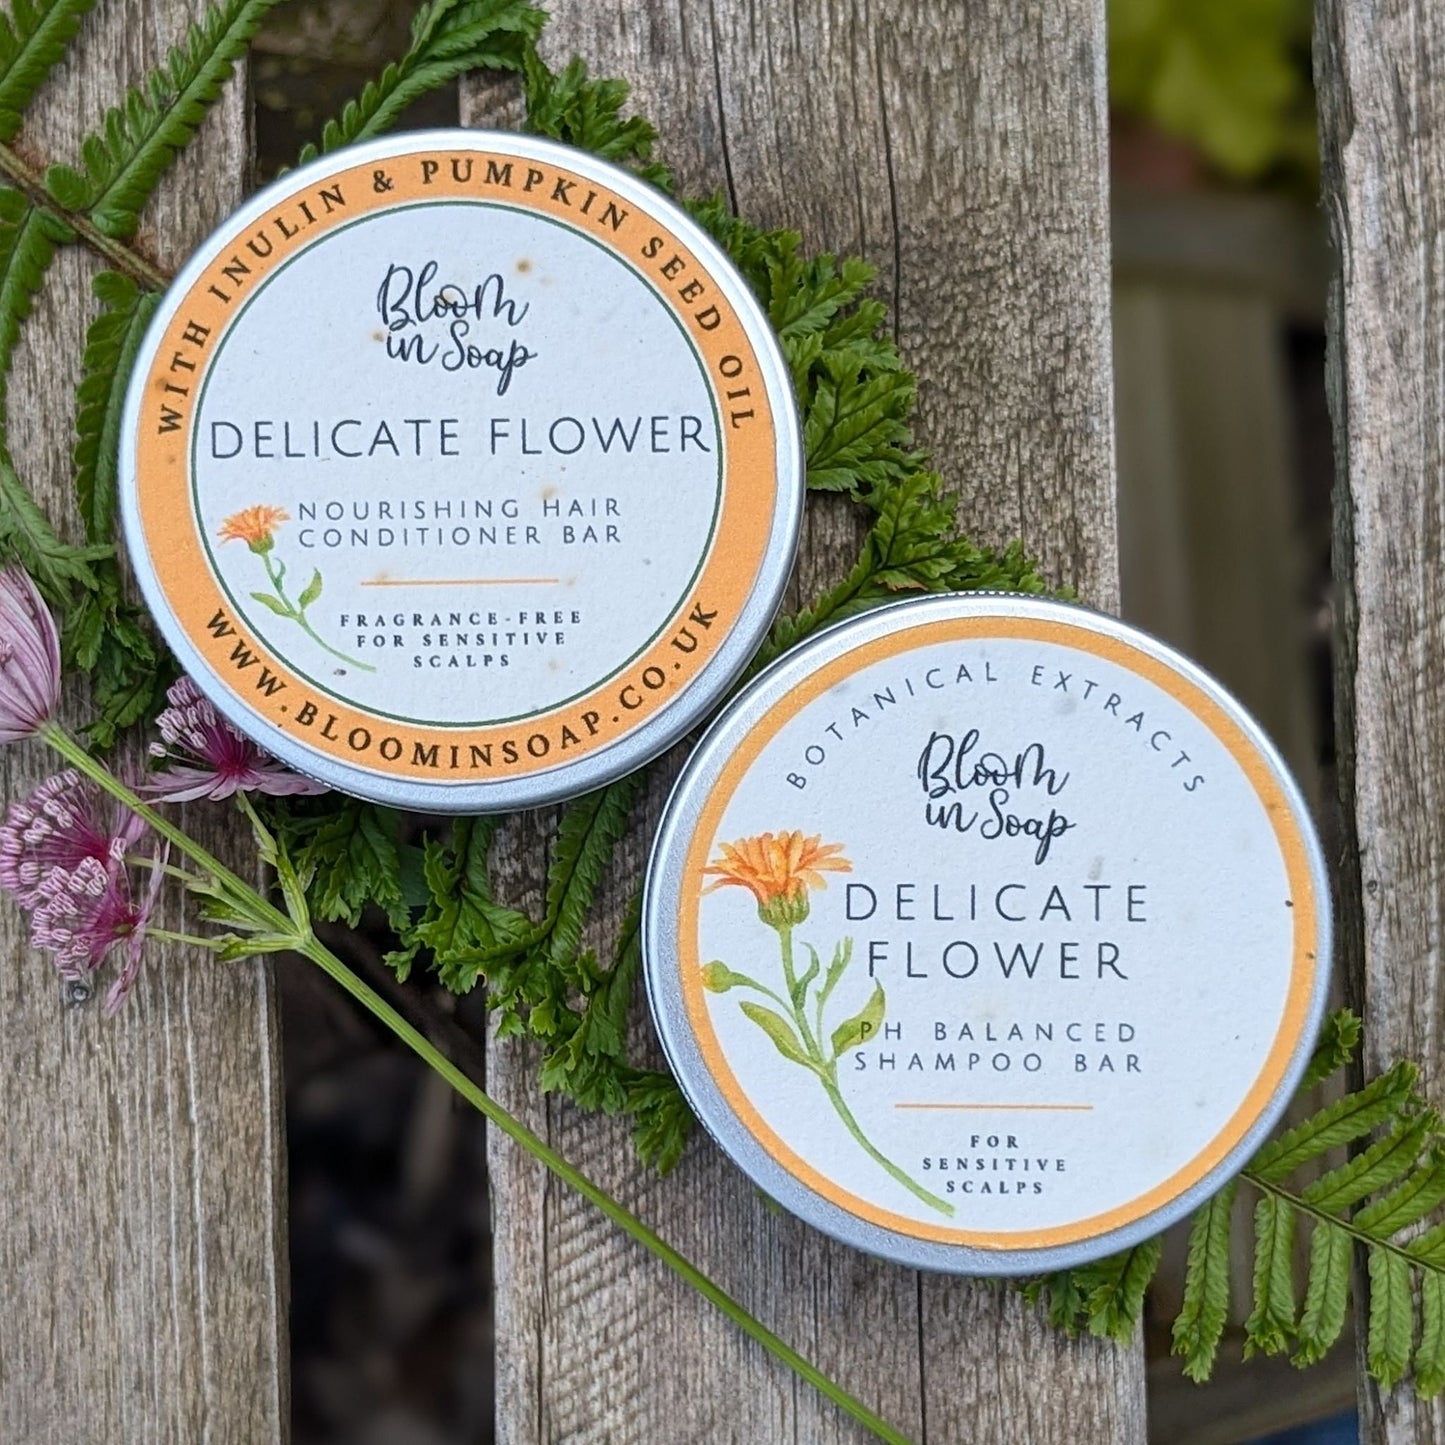 Delicate Flower unfragranced shampoo bars and hair conditioner bars